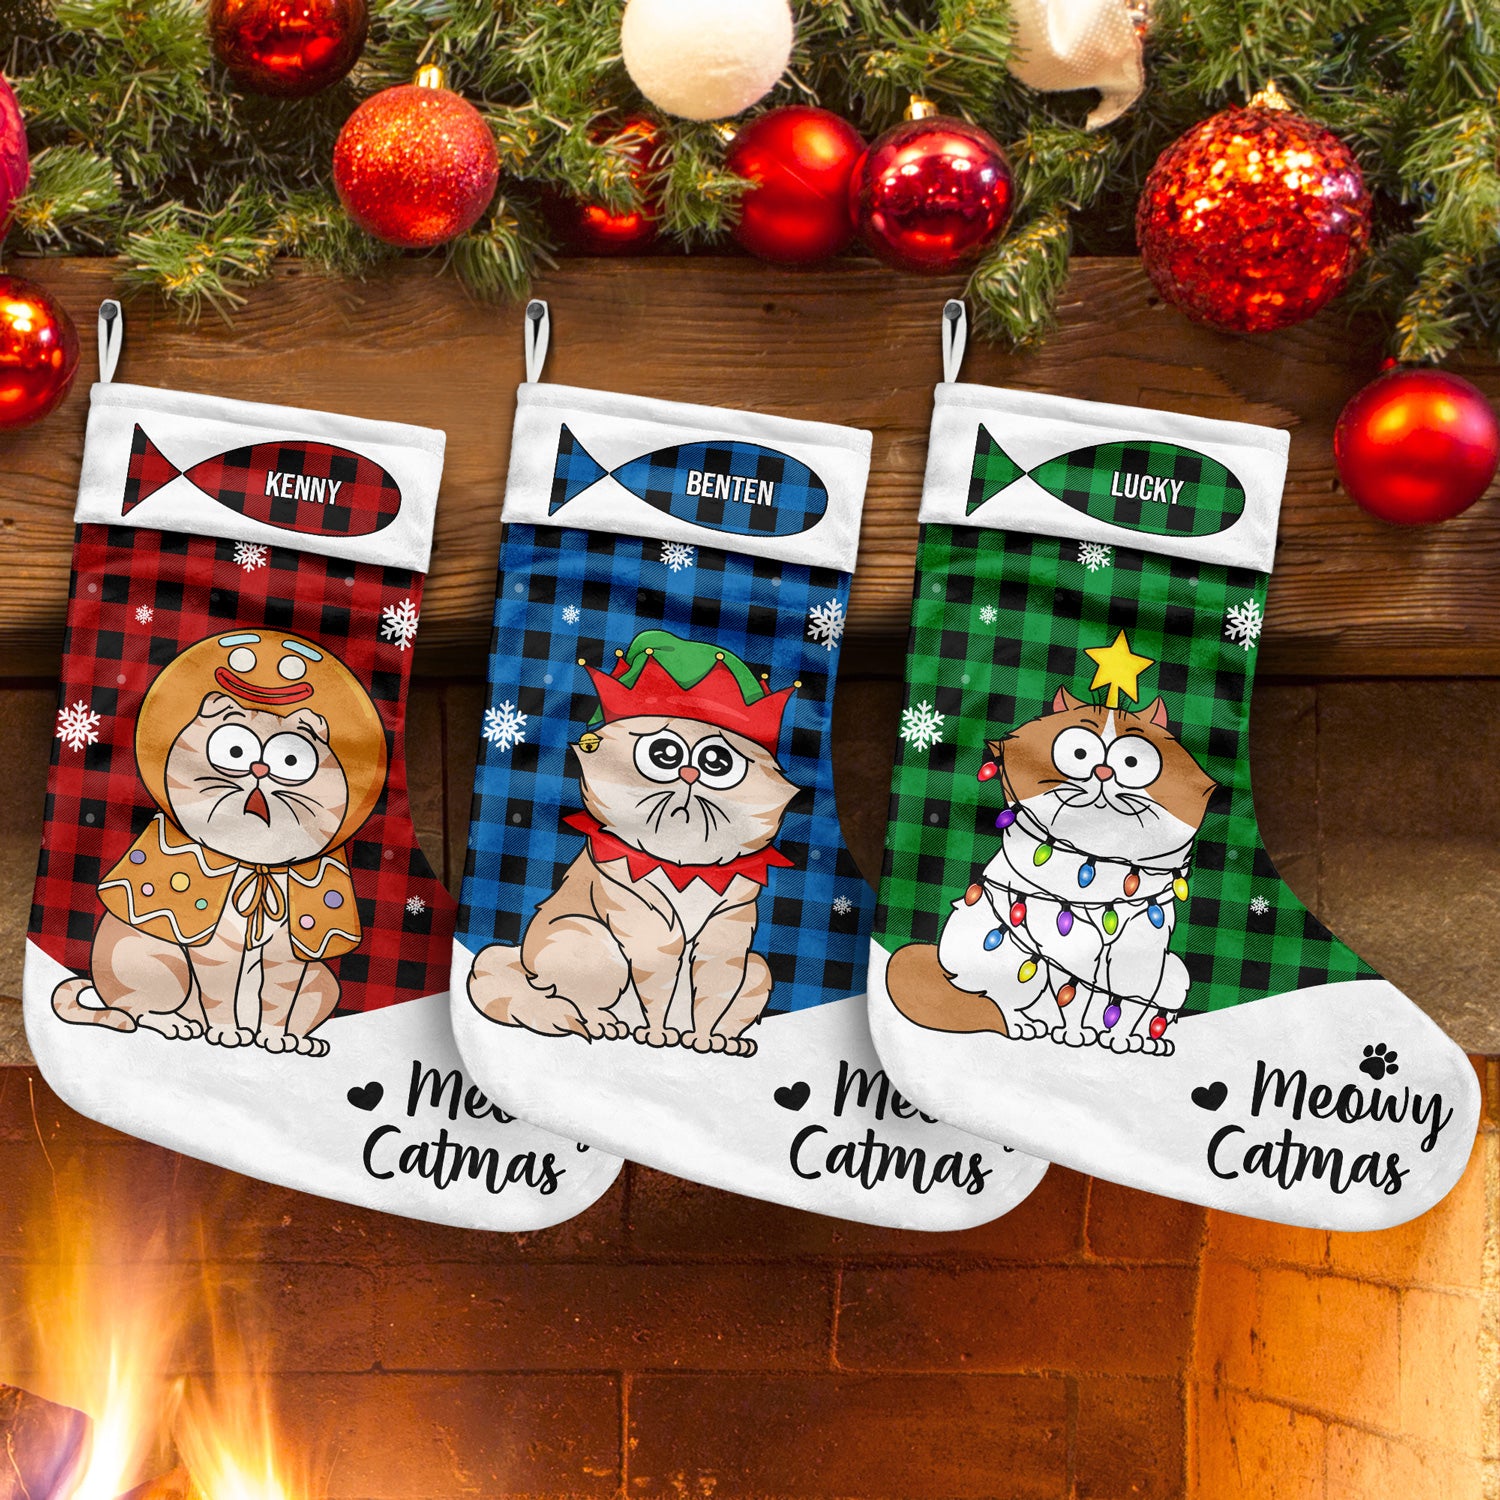 Meowy Catmas Funny Cartoon Cats - Christmas Gift For Cat Lovers - Personalized Christmas Stocking